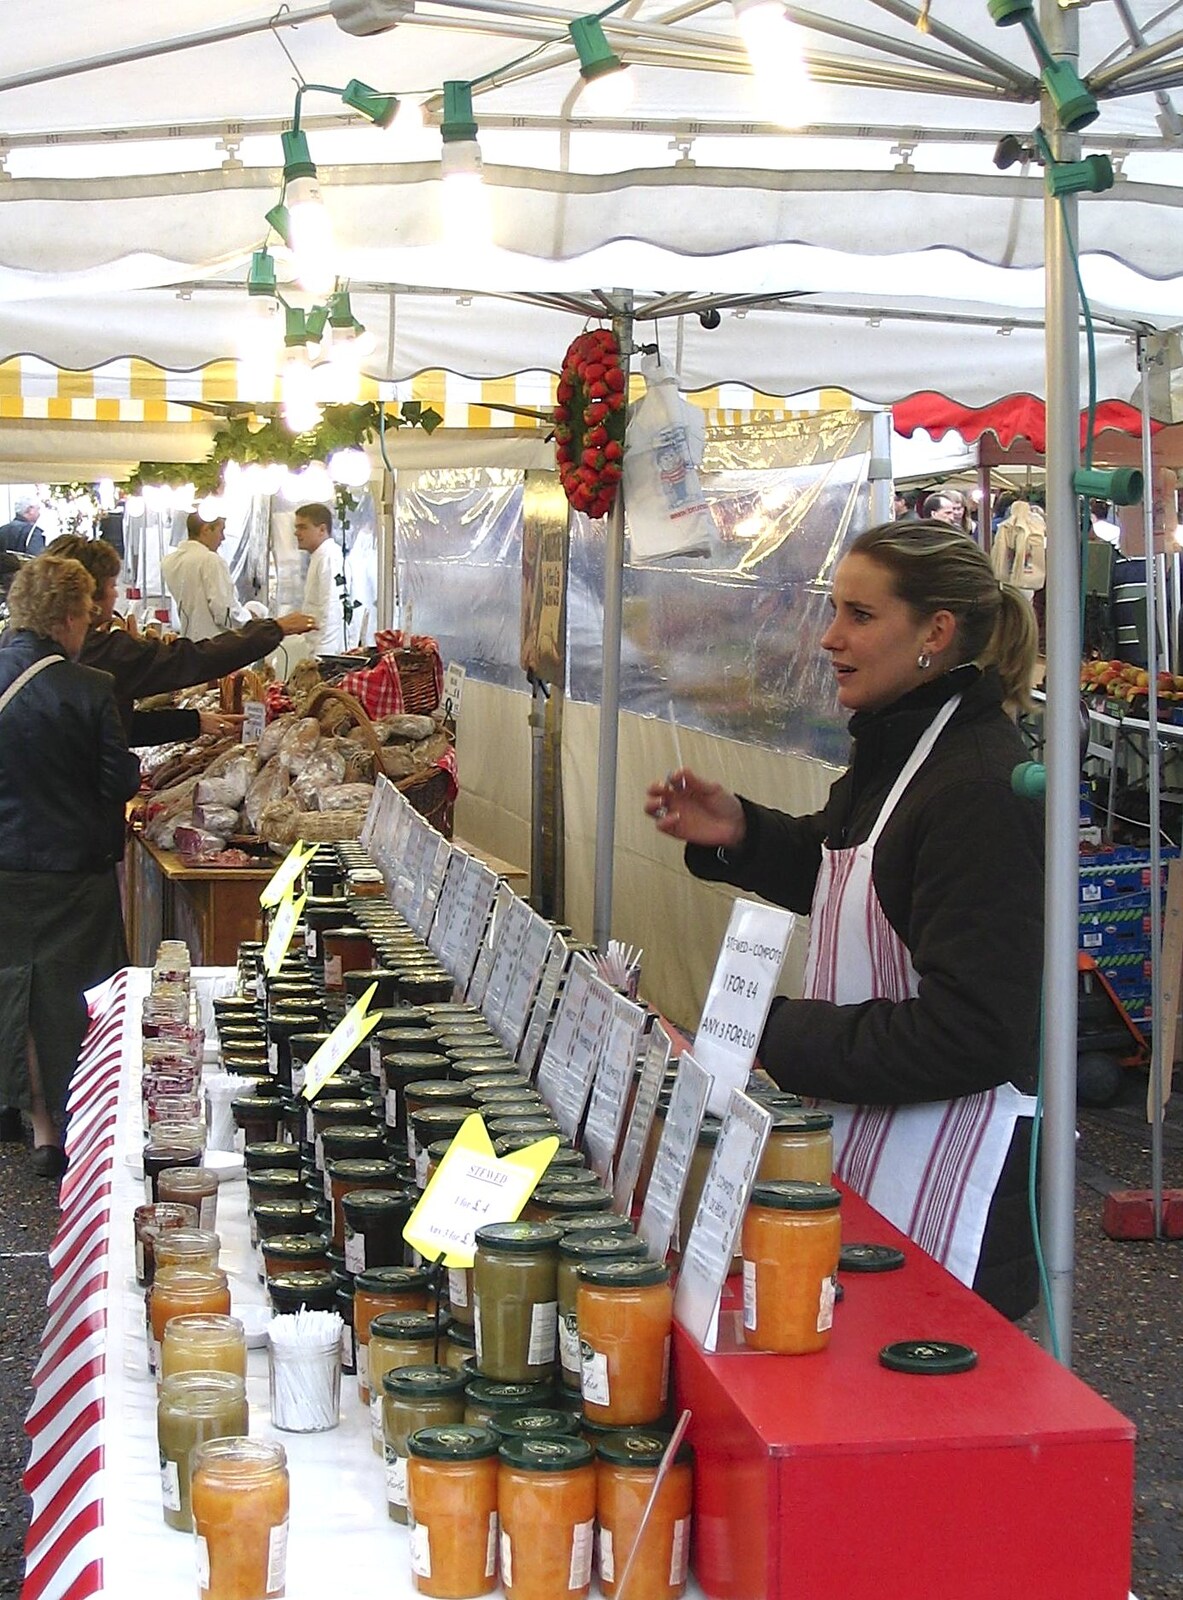 A woman sells preserves from A French Market, Blues and Curry, Diss, Scole and Brome - 17th October 2004